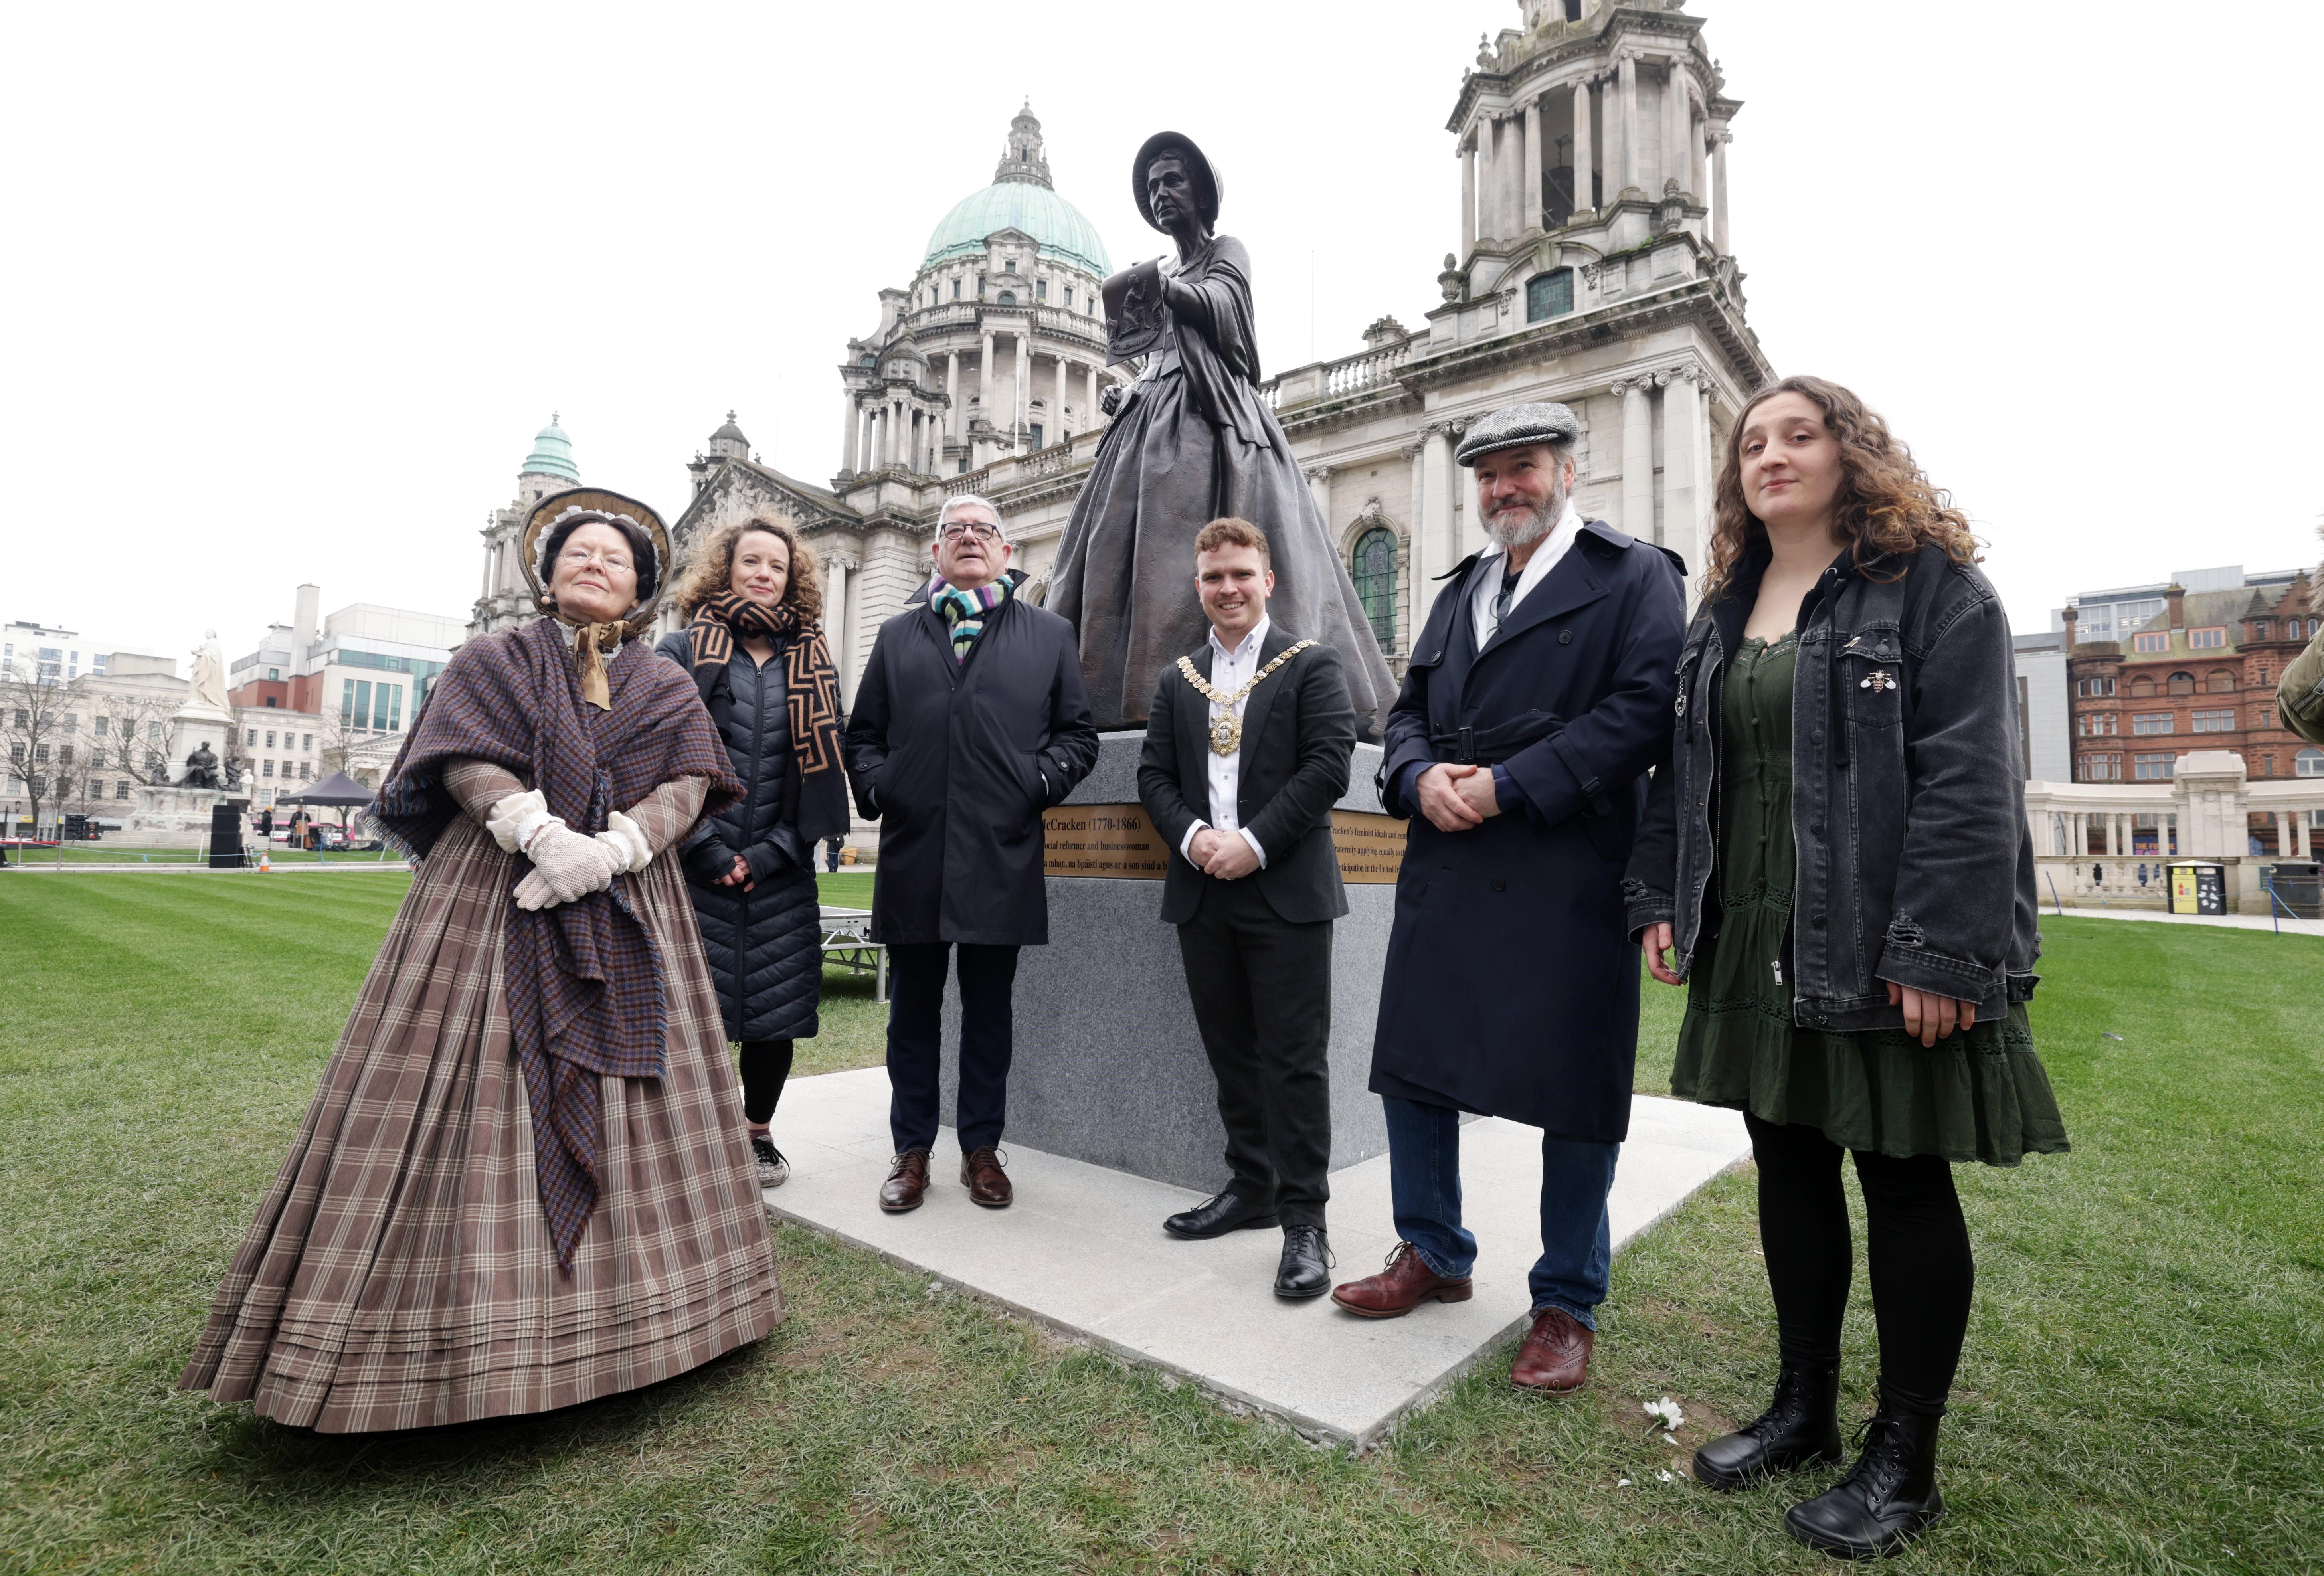 CHANGED DAYS: The unveiling of the two statues – including this one of Mary Ann McCracken – had a satisfyingly diverse attendance